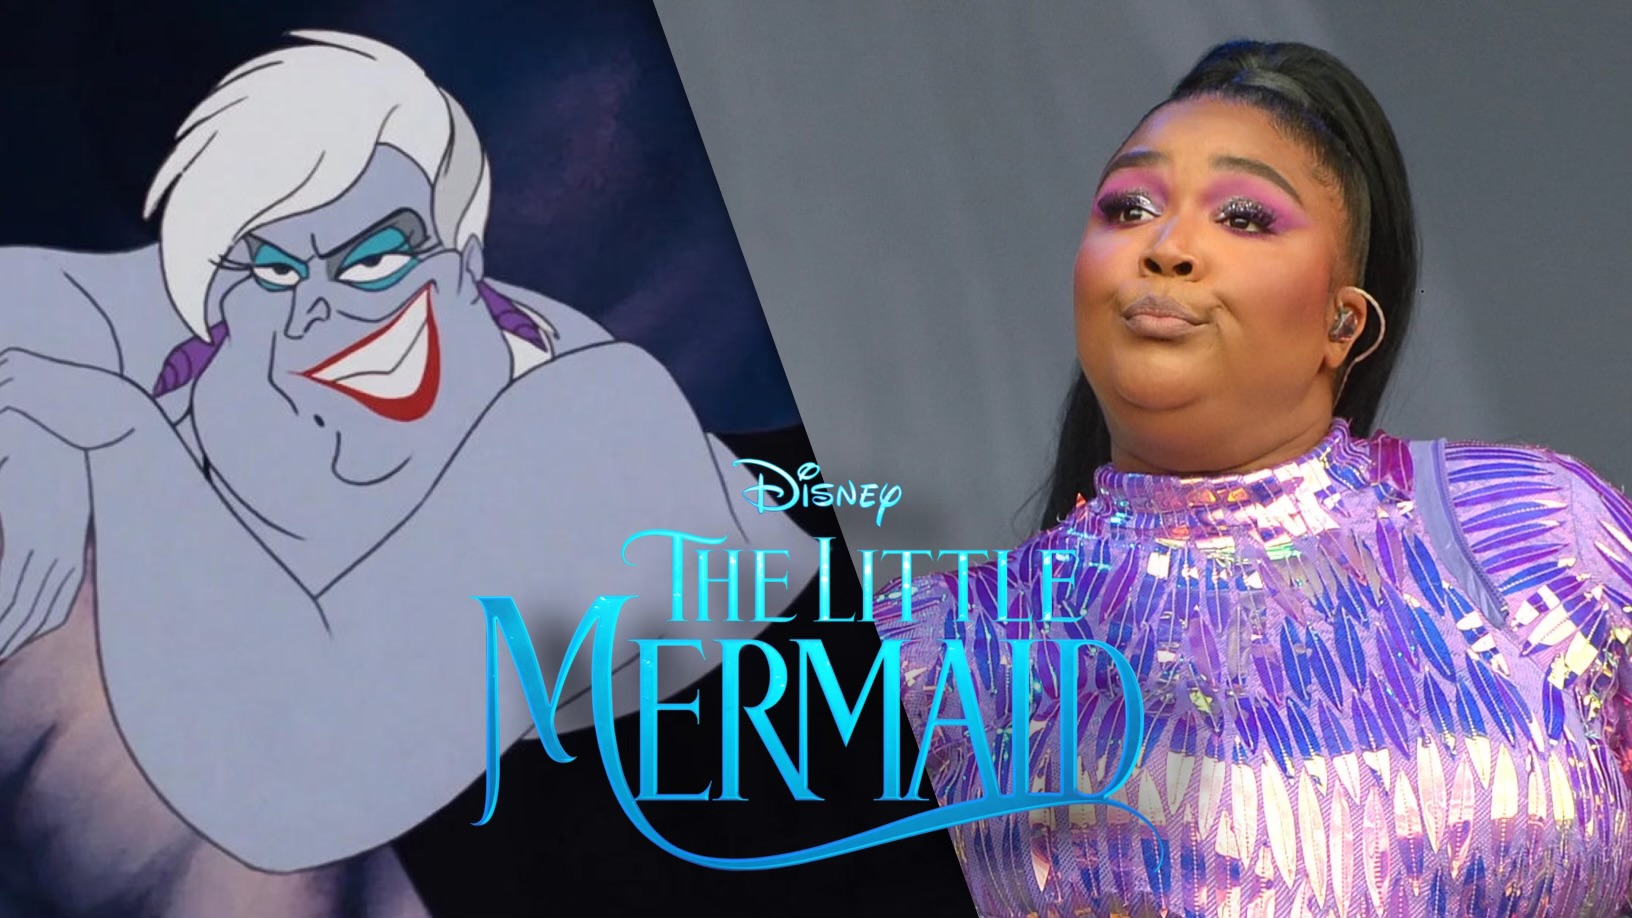 Lizzo Reveals She Auditioned To Play Ursula In Disney’s Live Action ‘The Little Mermaid’